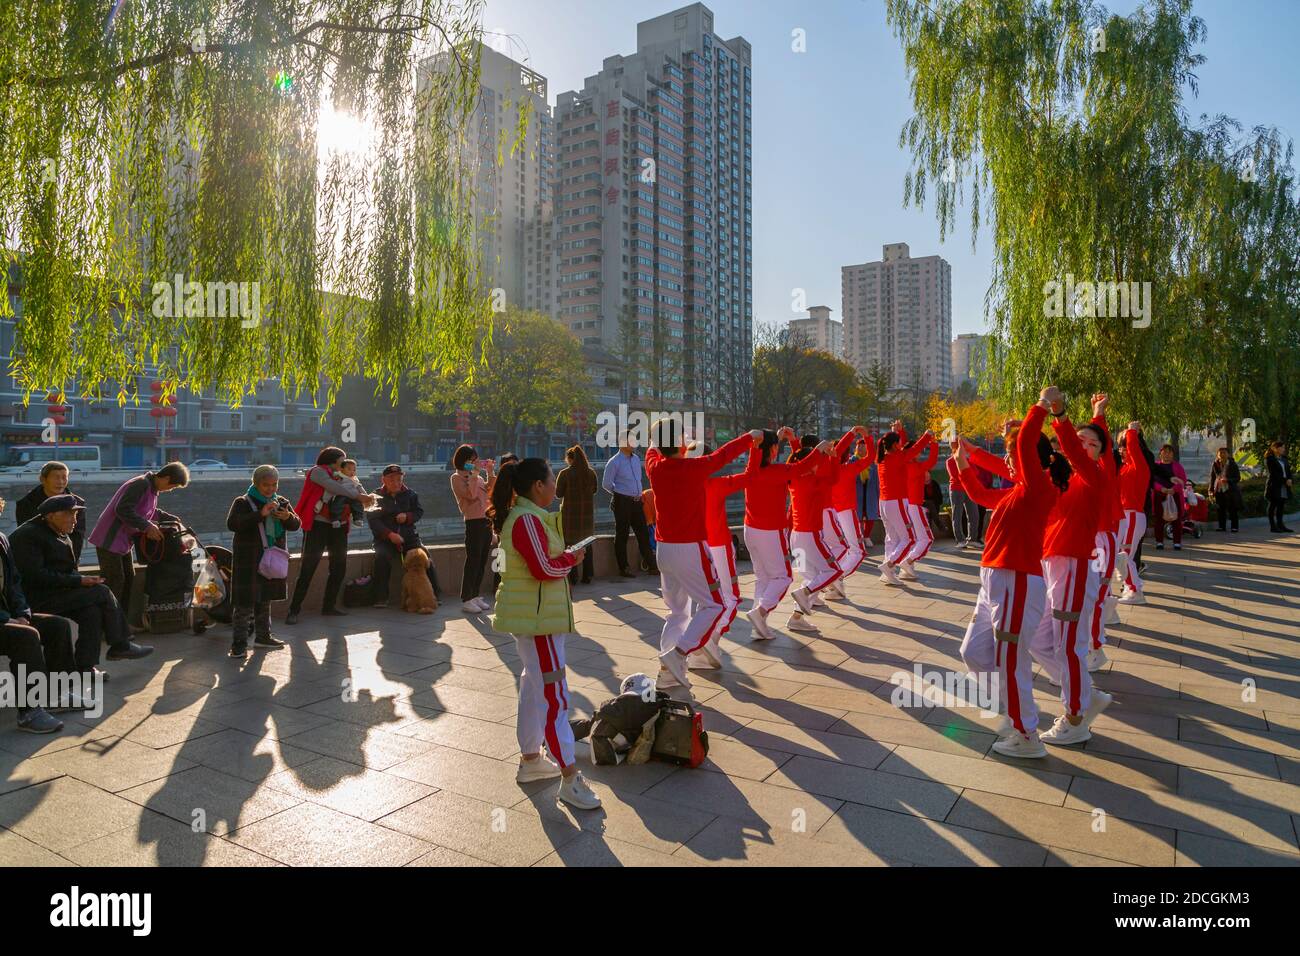 Locals dancing in the park and City wall of Xi'an, Shaanxi Province, People's Republic of China, Asia Stock Photo